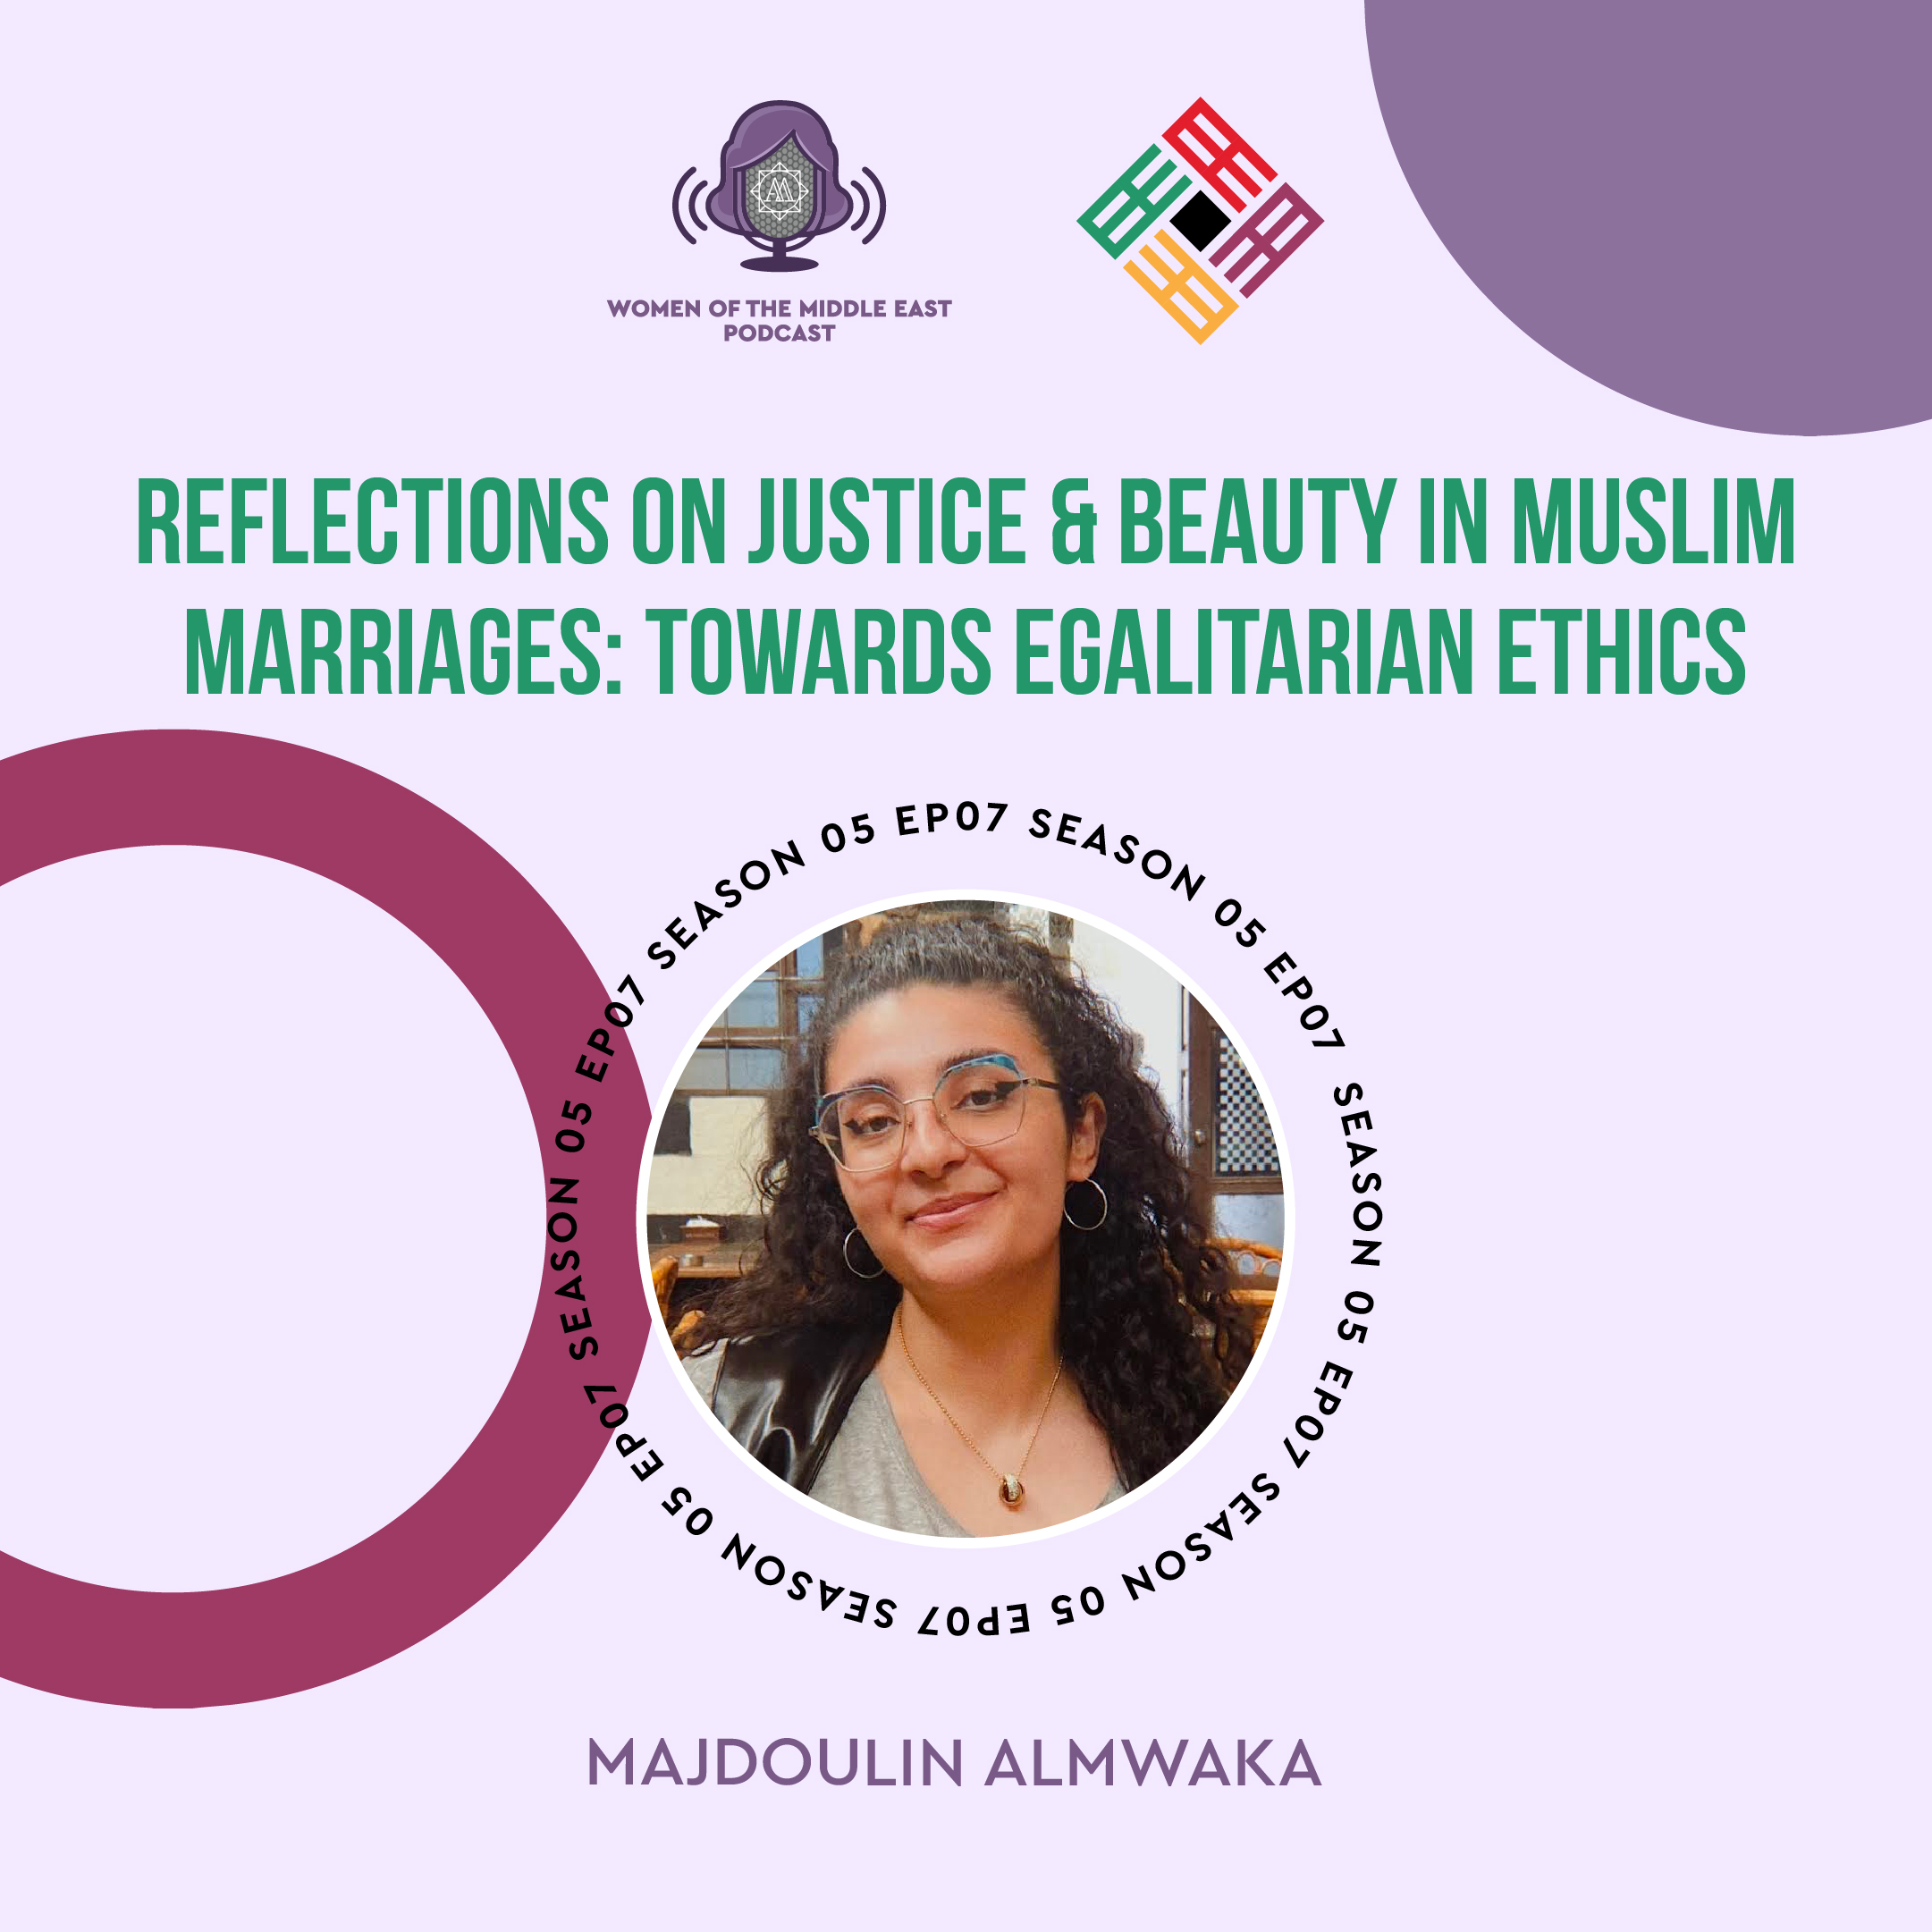 S5 E7: Reflections on Justice & Beauty in Muslim Marriages: Towards Egalitarian Ethics